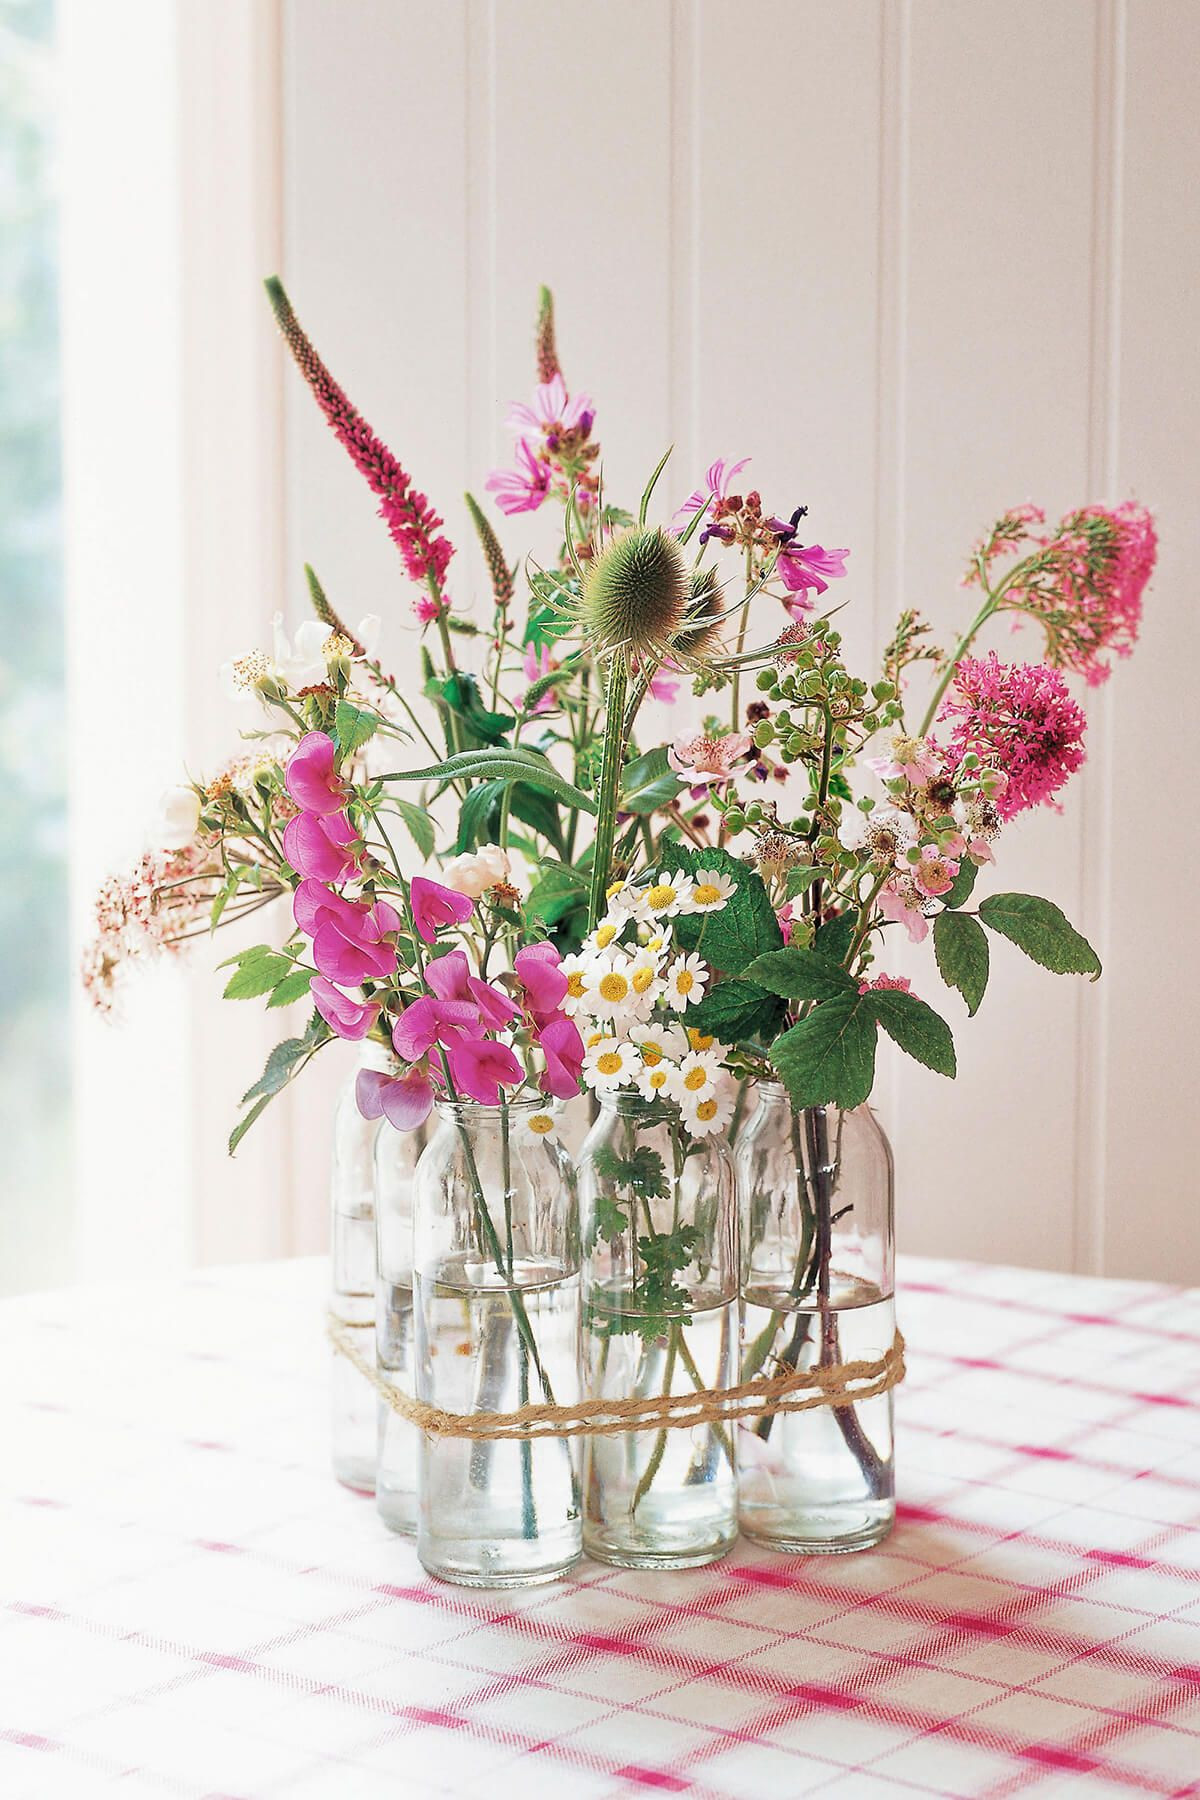 10 attractive Short Vase Centerpiece Ideas 2024 free download short vase centerpiece ideas of 36 flower arrangement ideas to brighten any occasion easter throughout entwined collection of wildflower bud bases